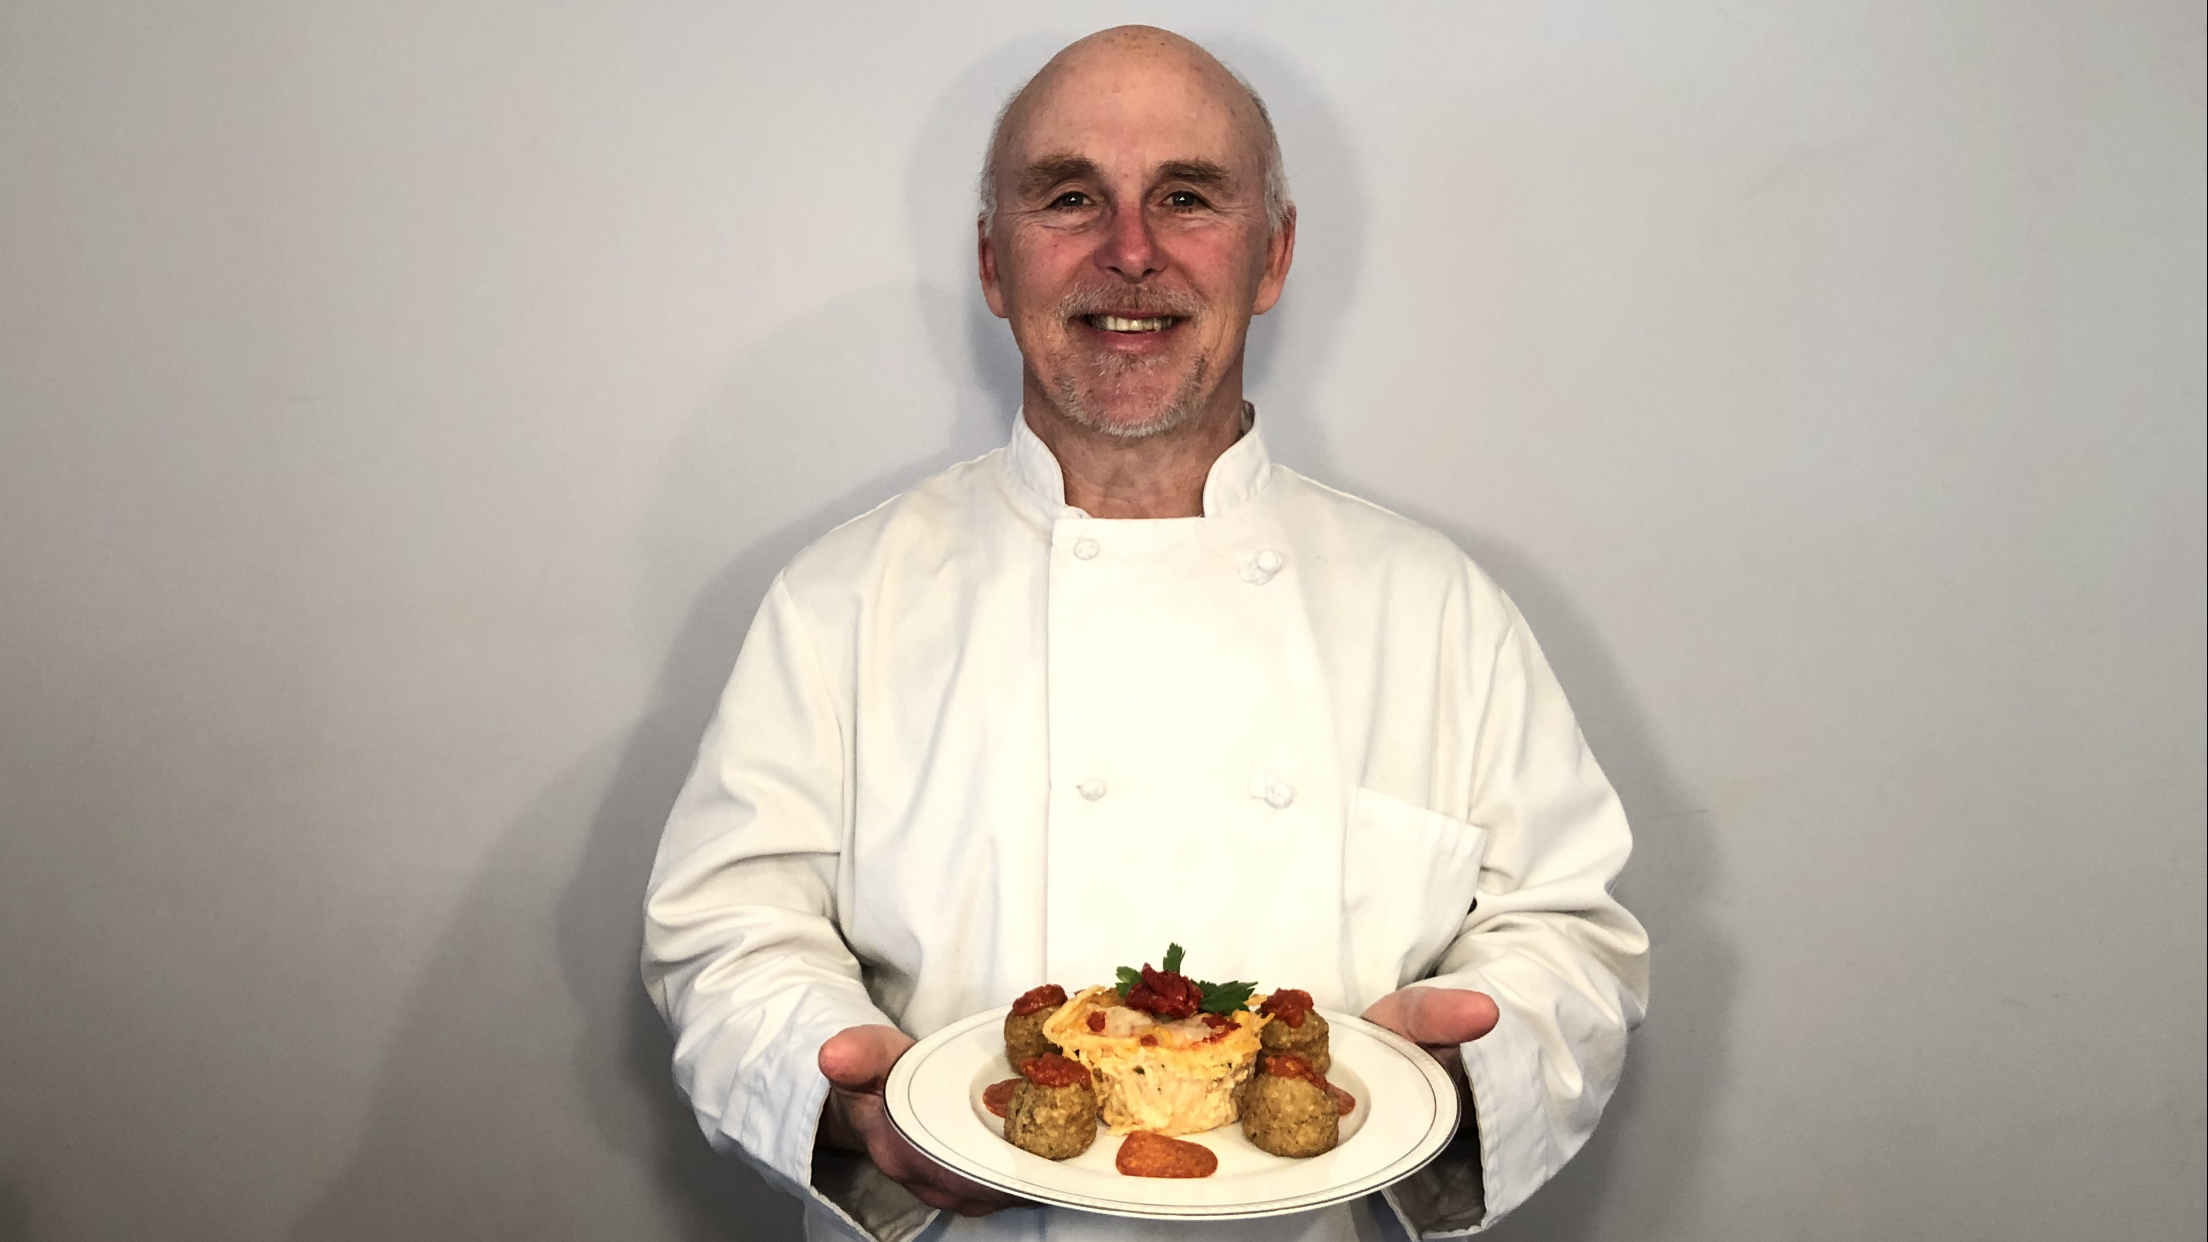 Photo of Chef Rob holding plate with Spaghetti Muffins.